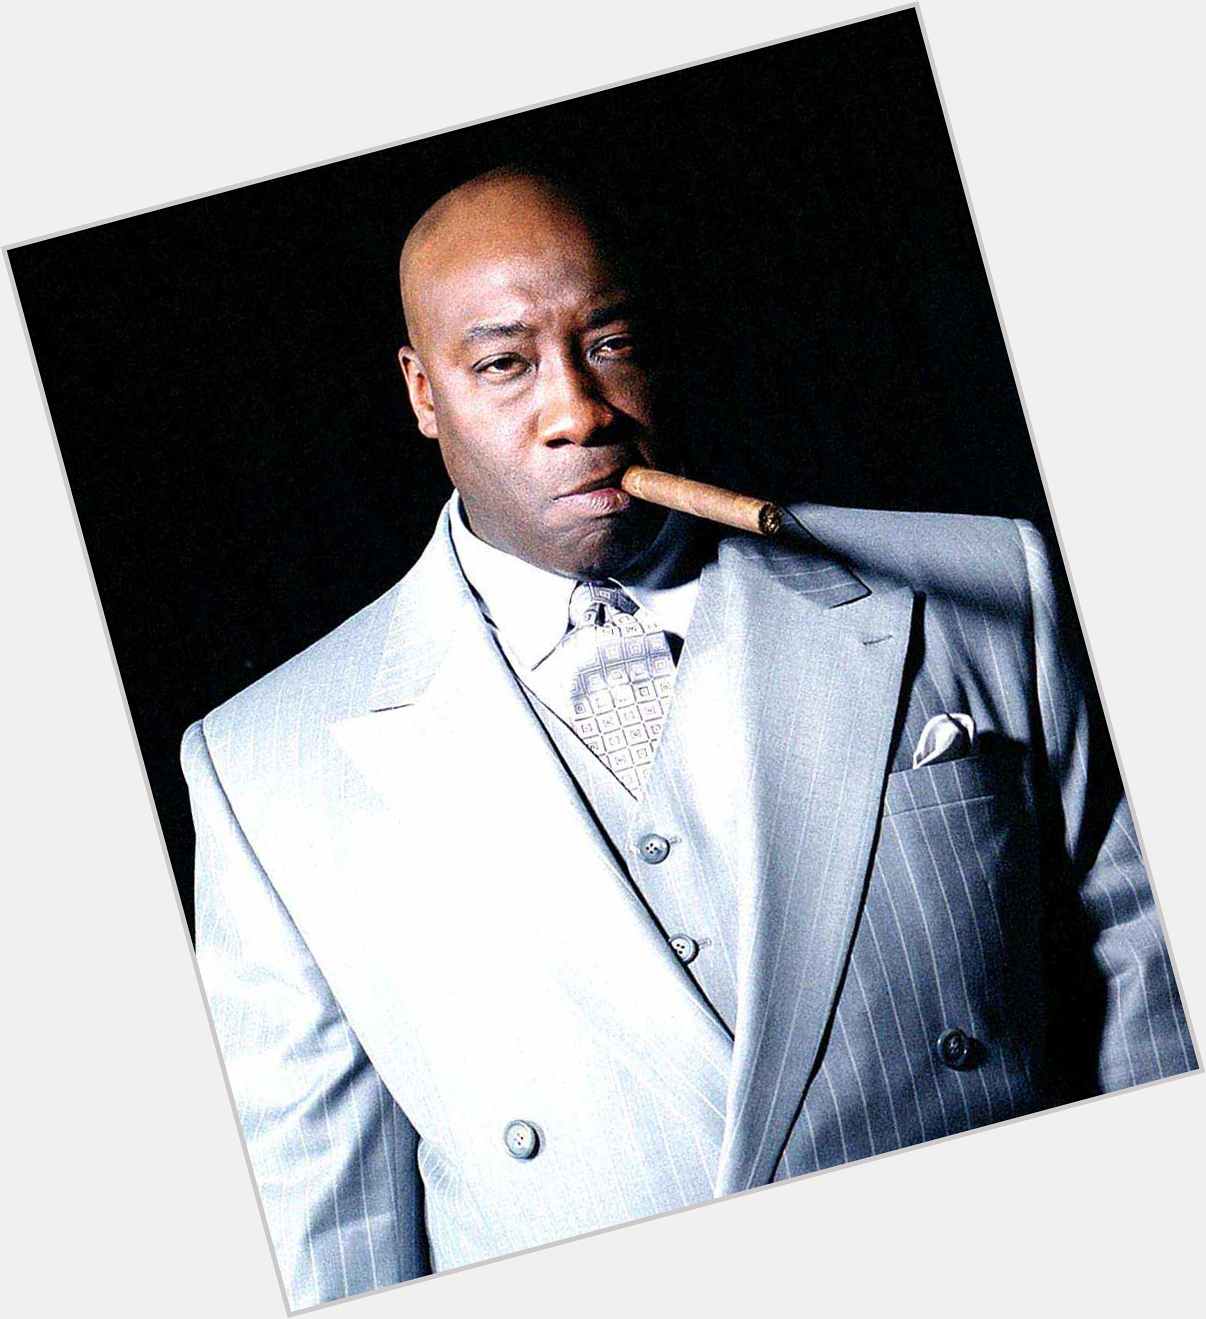 Happy birthday to the late Michael Clarke Duncan. R.I.P.
Lived: Dec 10, 1957 - Sep 03, 2012 (age 54) 